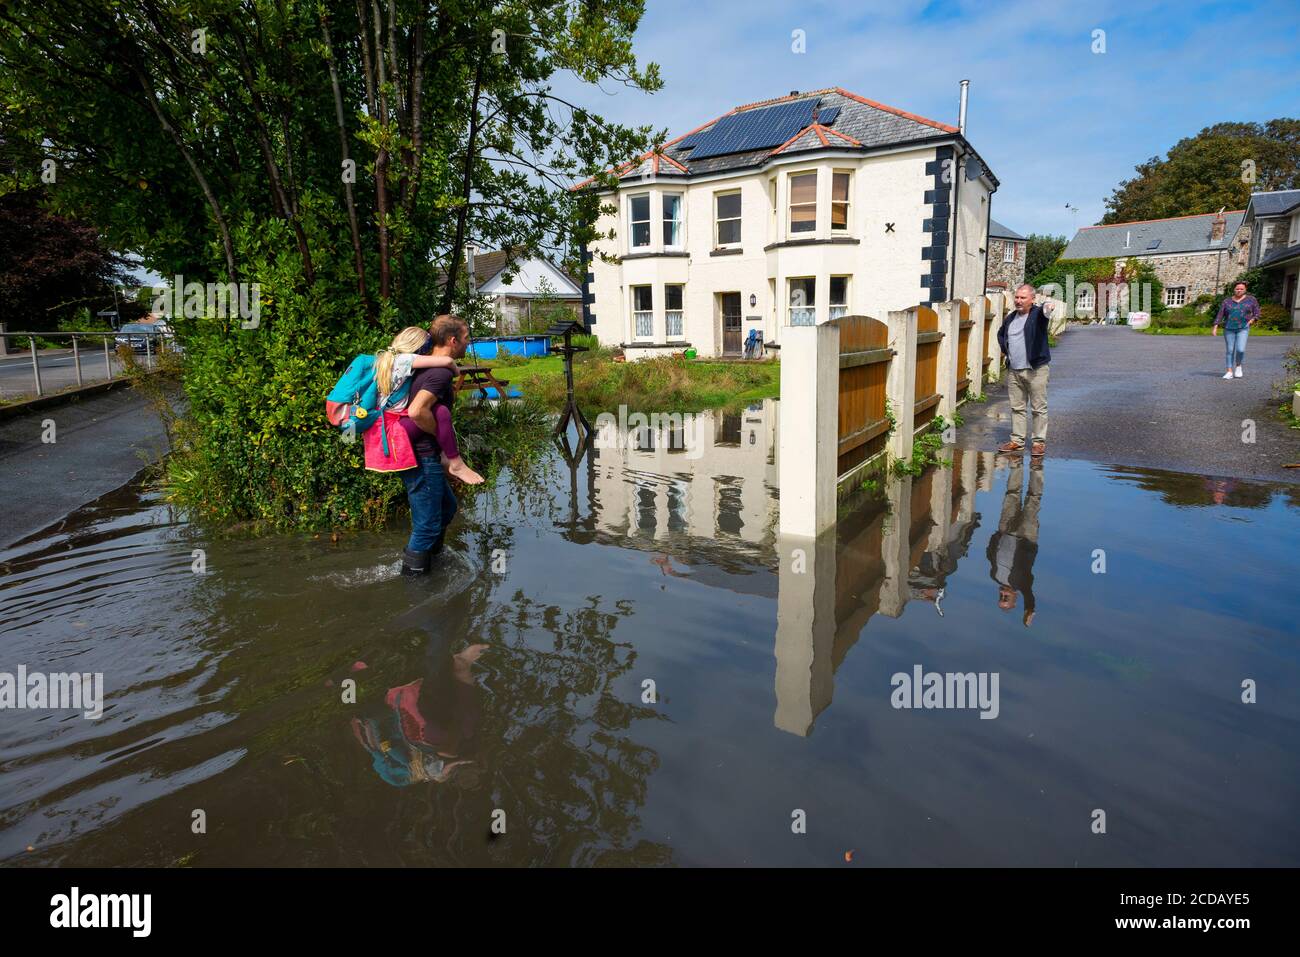 Par, Cornwall, UK. 27/08/2020. The front garden if a house is submerged after torrential rain and high tides overwhelm the drainage systems. Stock Photo